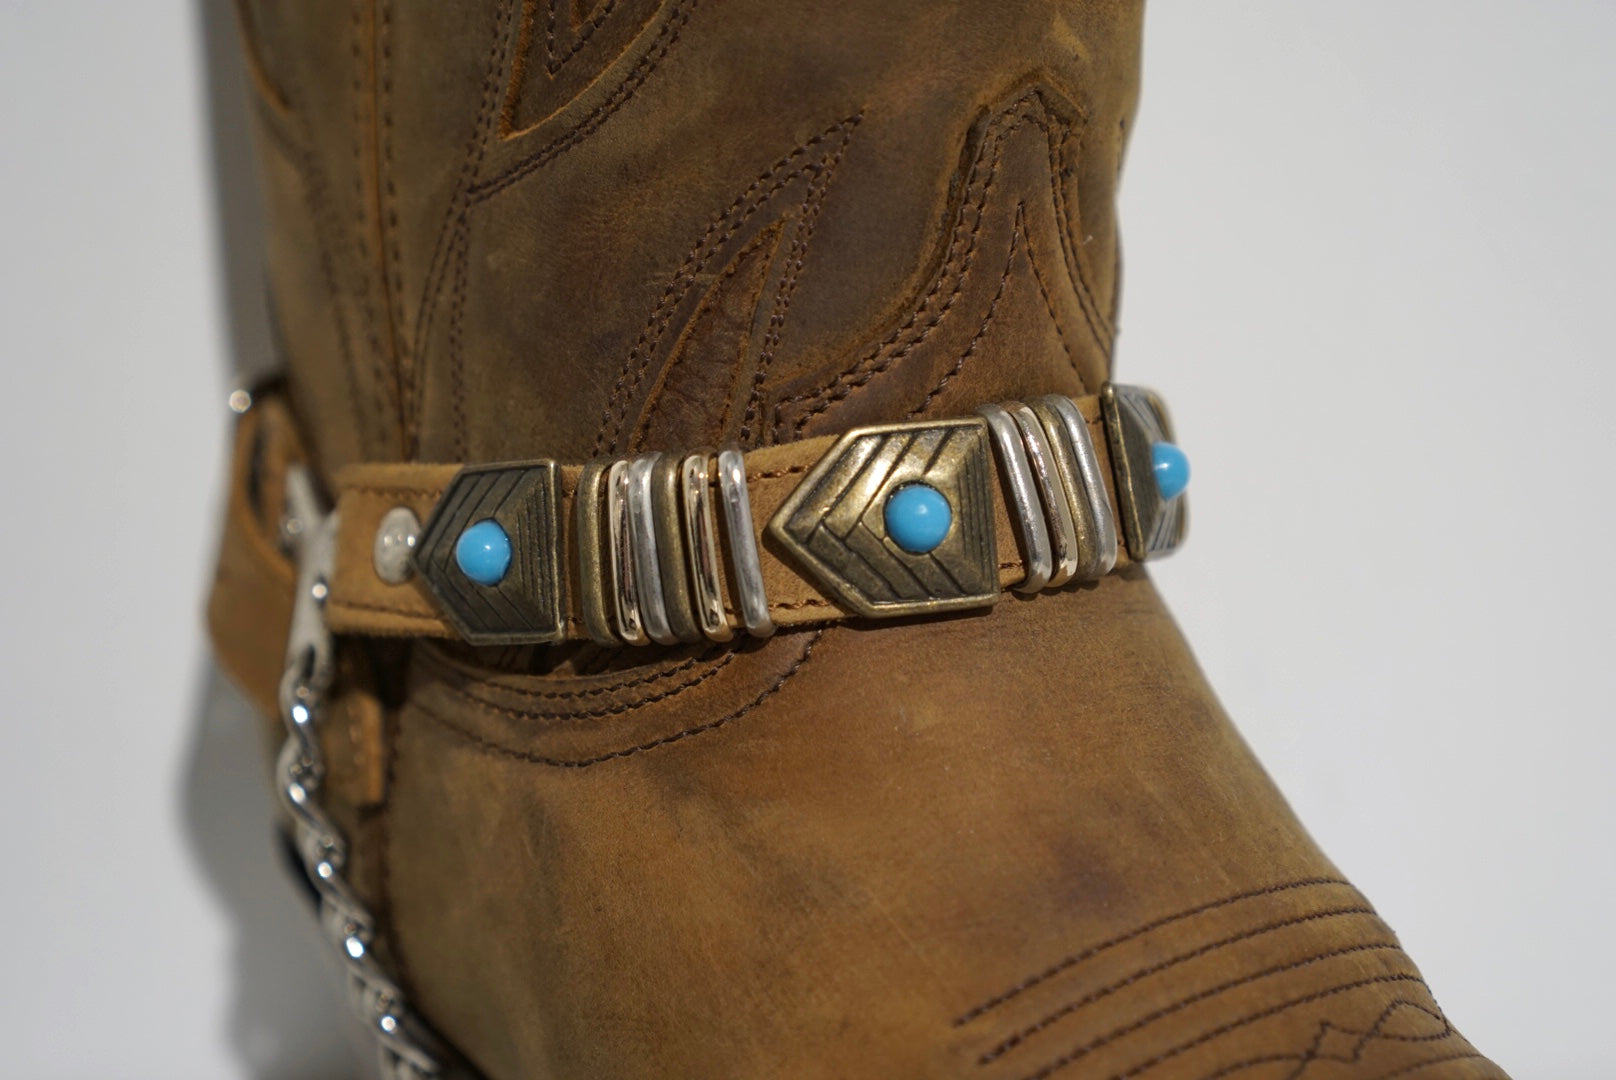 Sendra spurs - light brown, silver/gold with turquoise stones